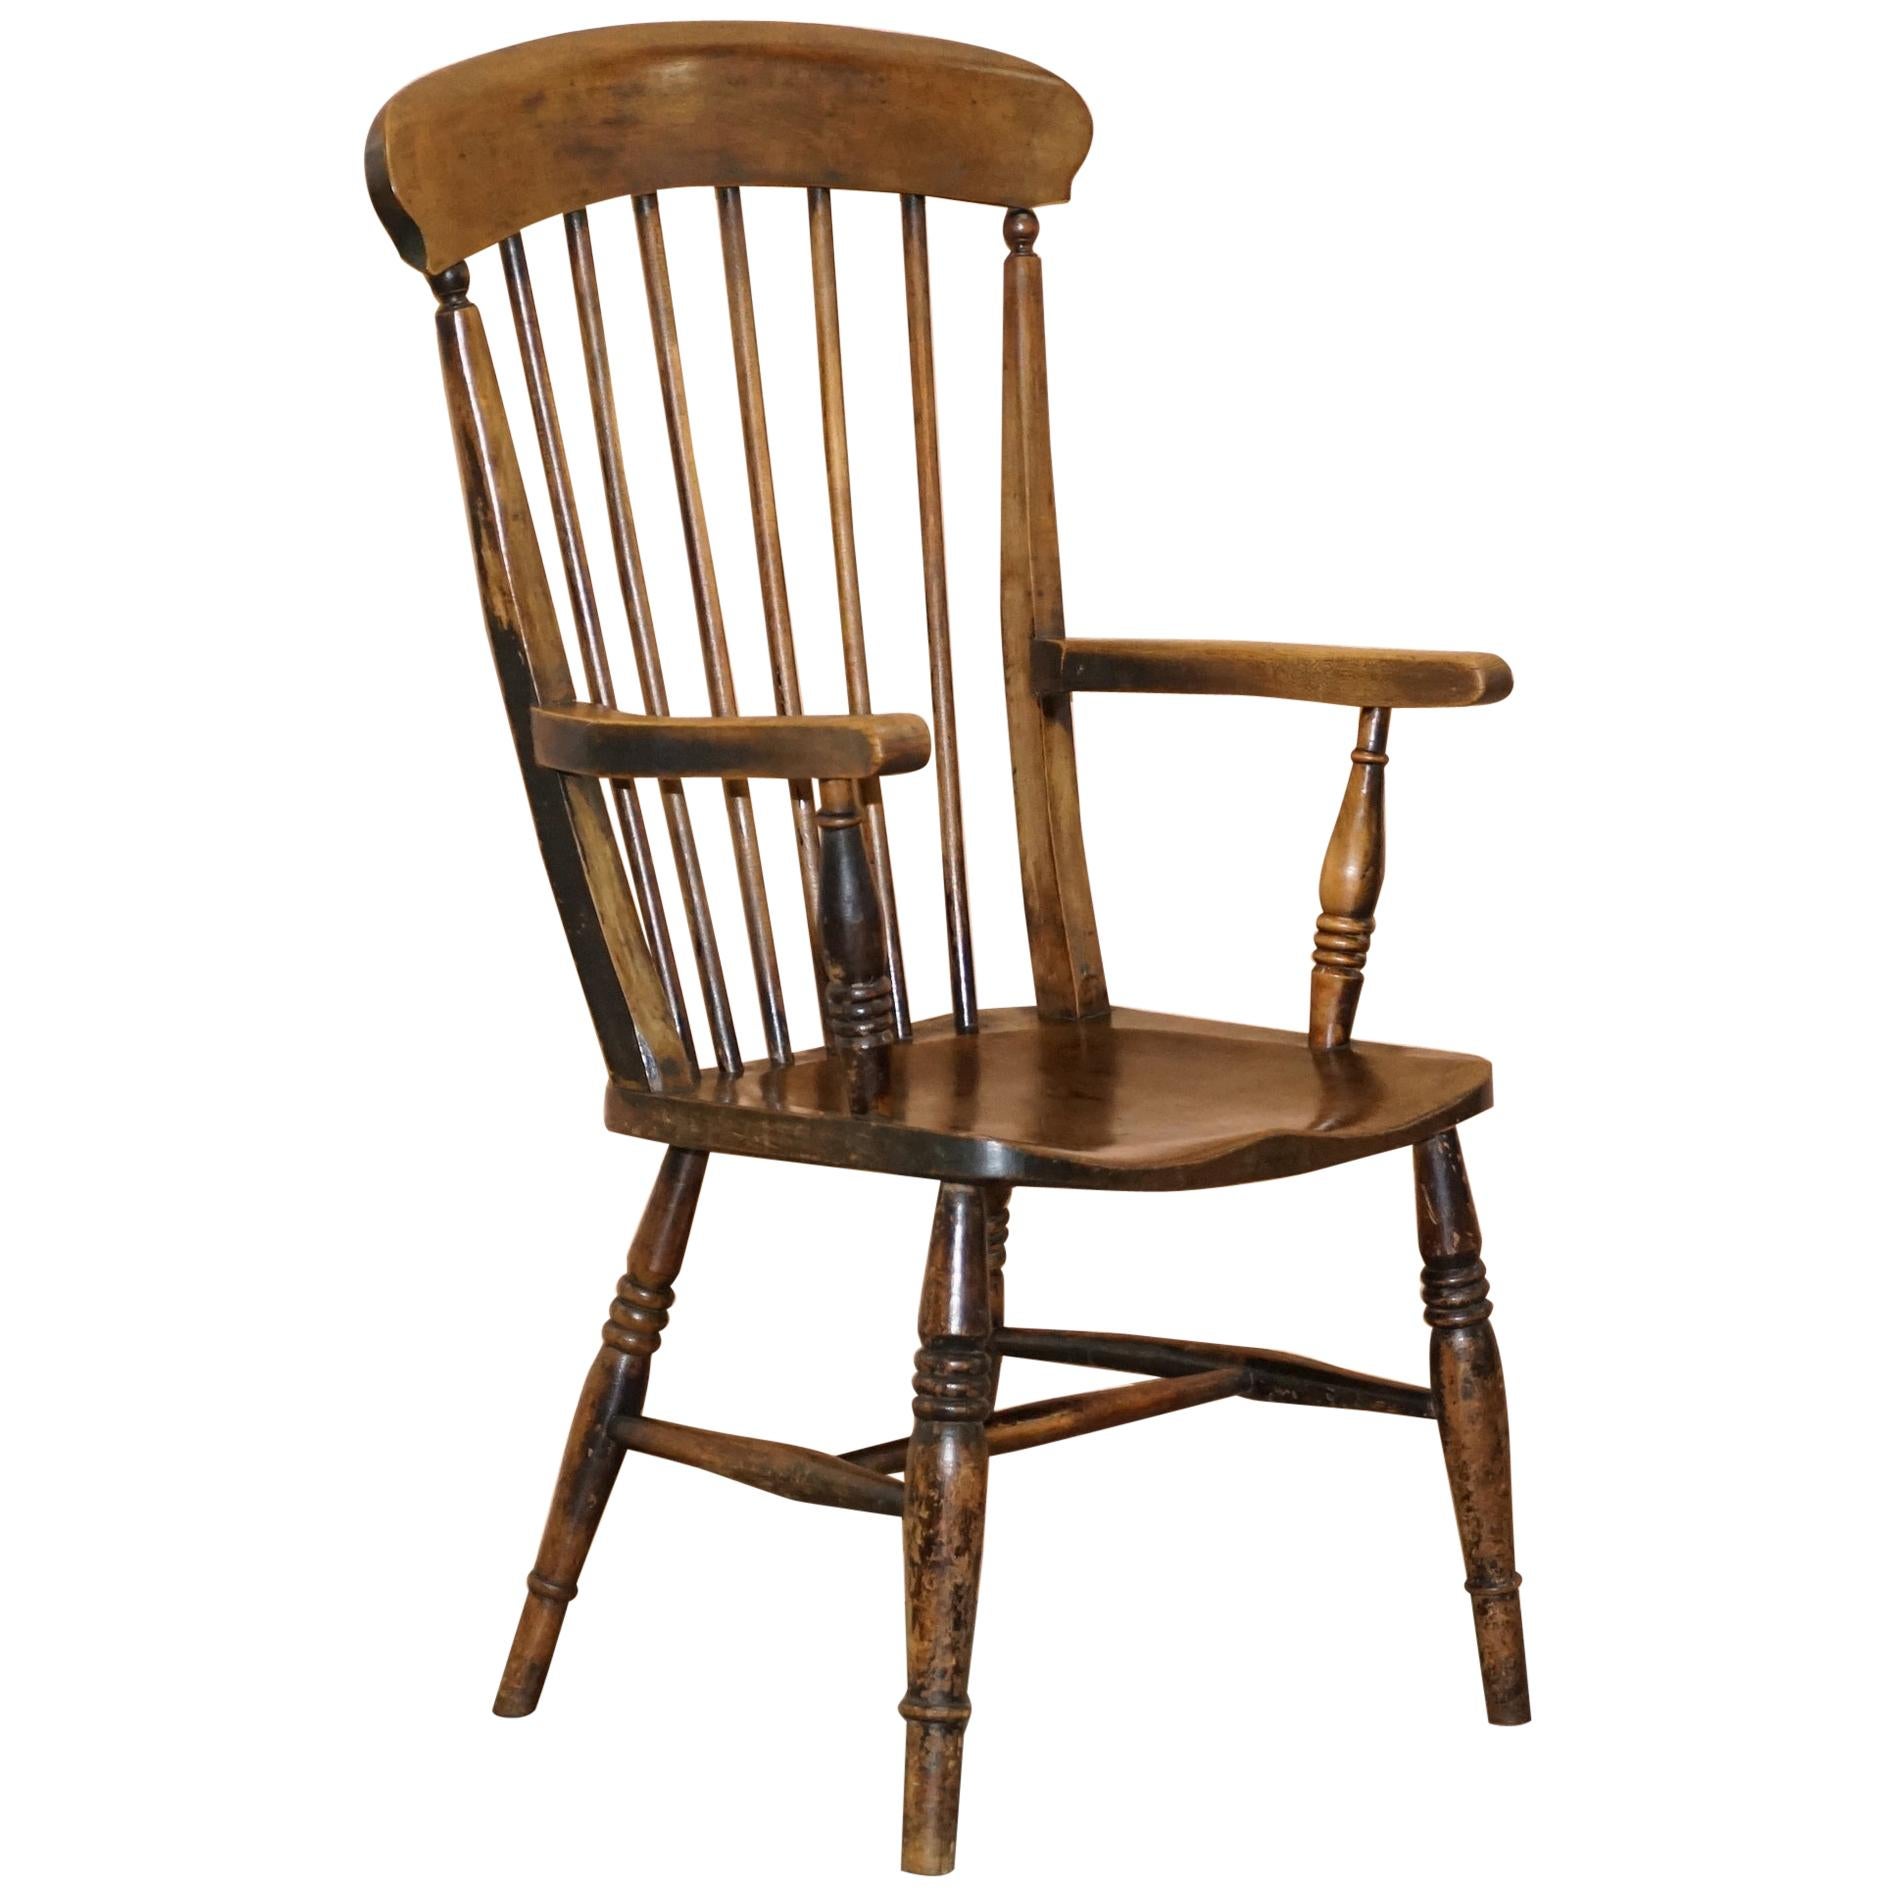 Original Paint 19th Century Thames Valley Oxford Windsor Armchair Stunning Wood